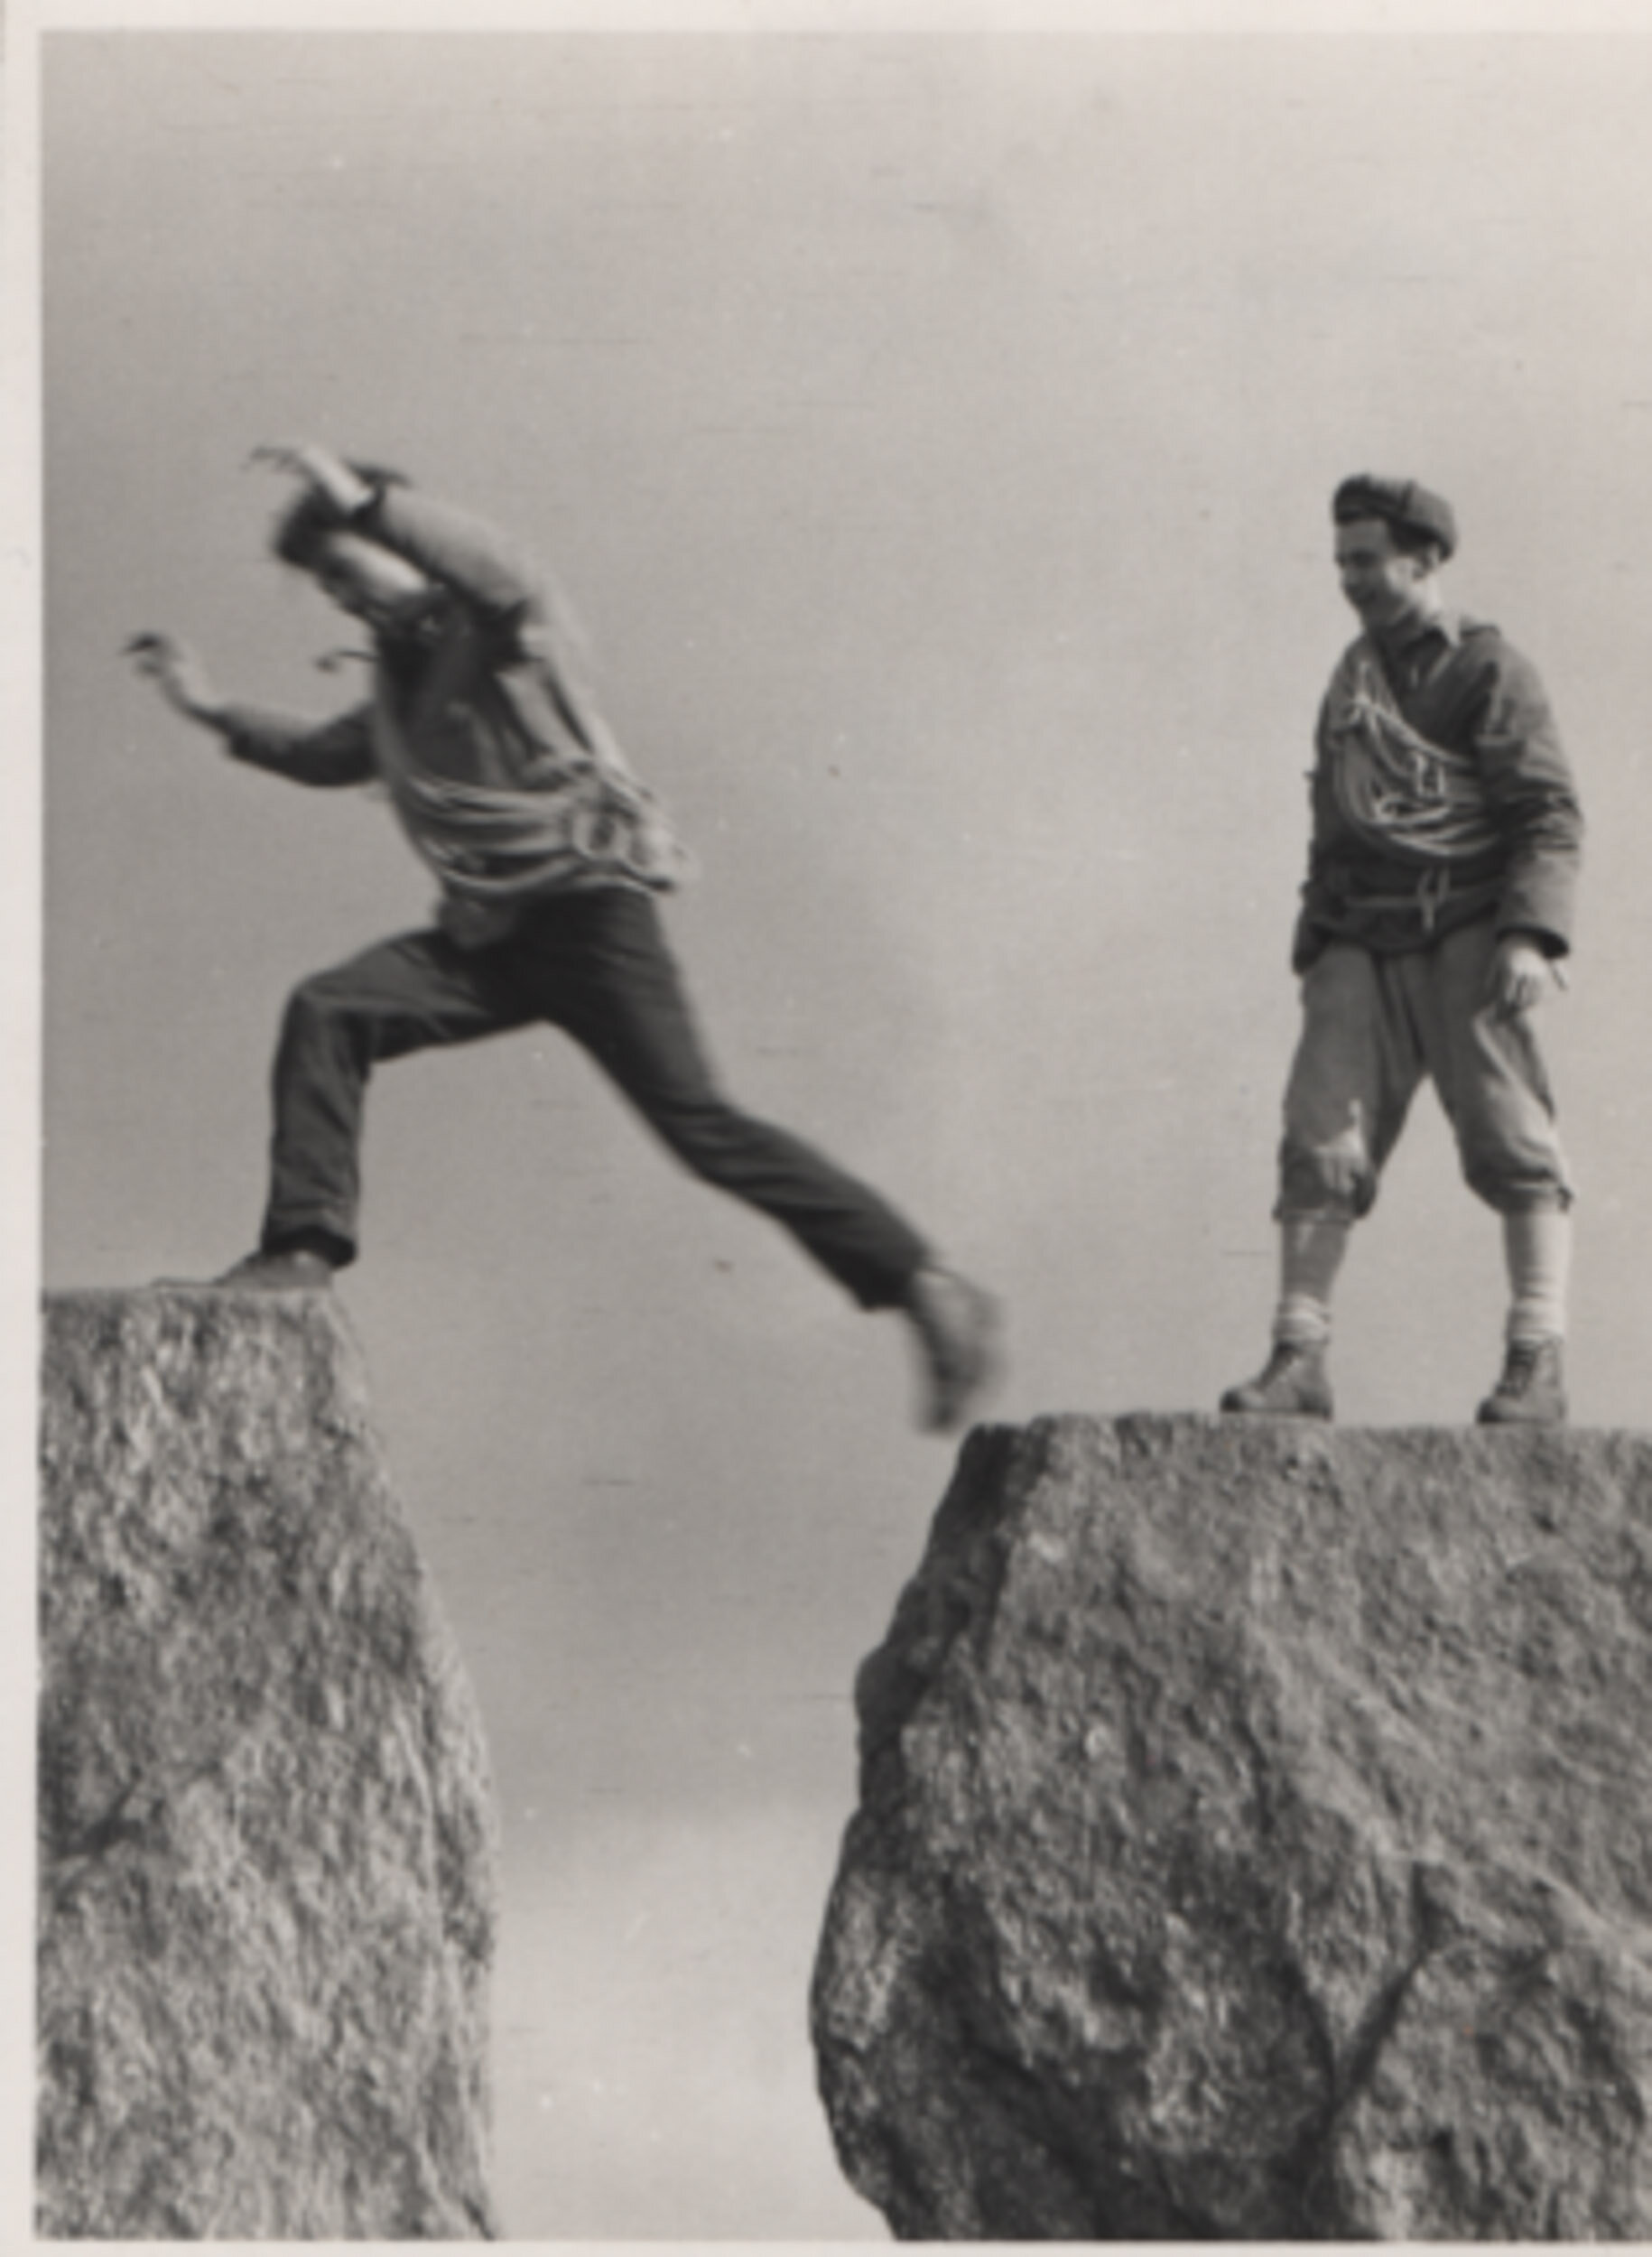 Mollie Agnew jumping from Adam to Eve (Tryfan, Snowdonia), 1960